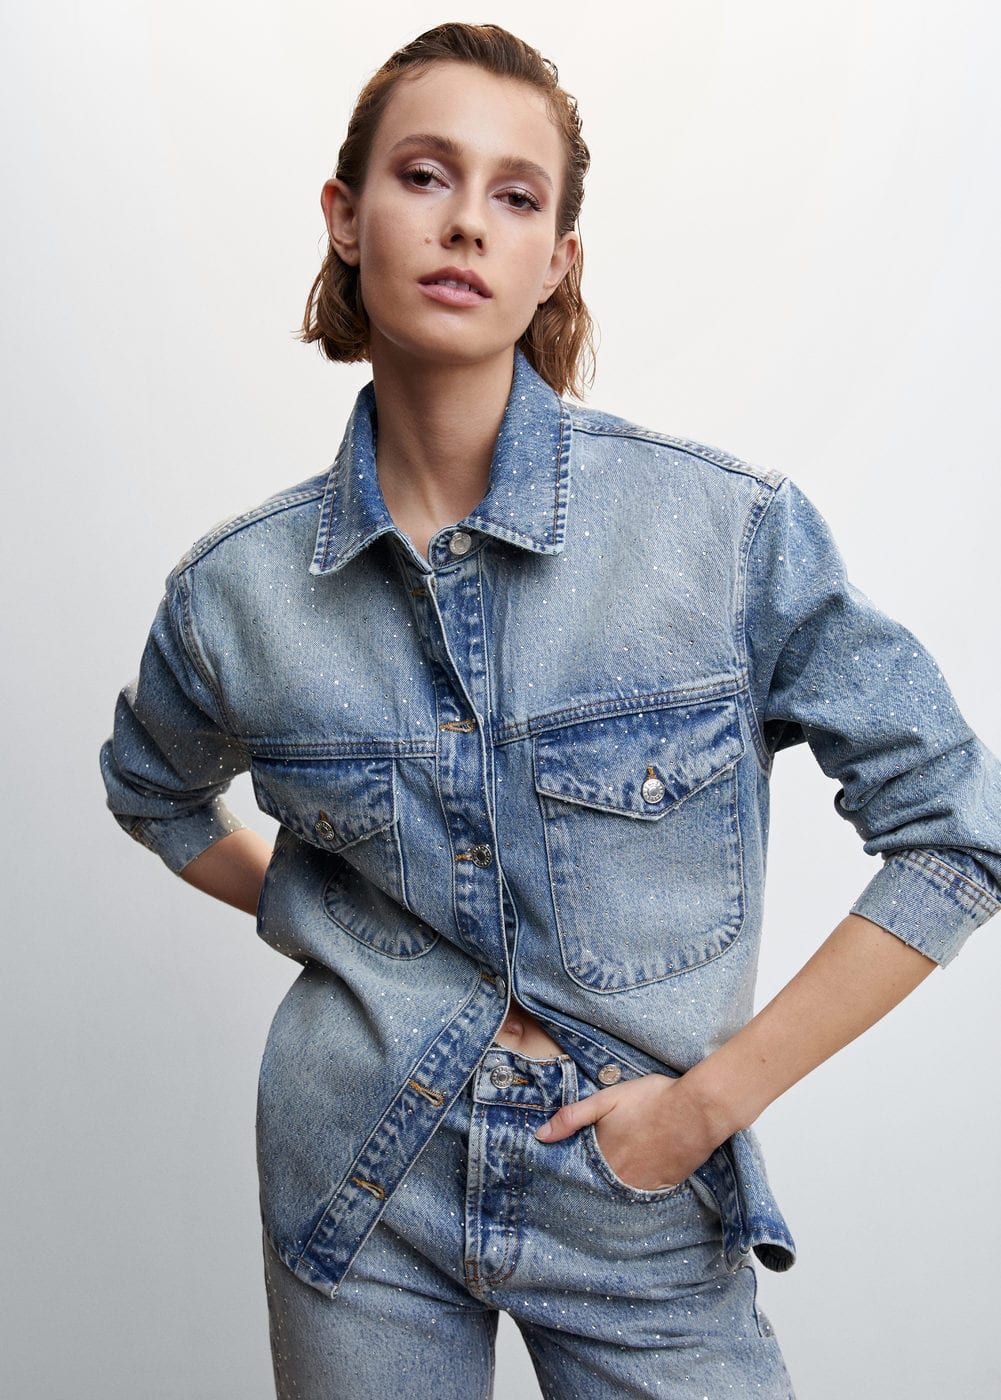 This Is How Fashion Girls Will Be Wearing Denim in 2023 | Who What Wear